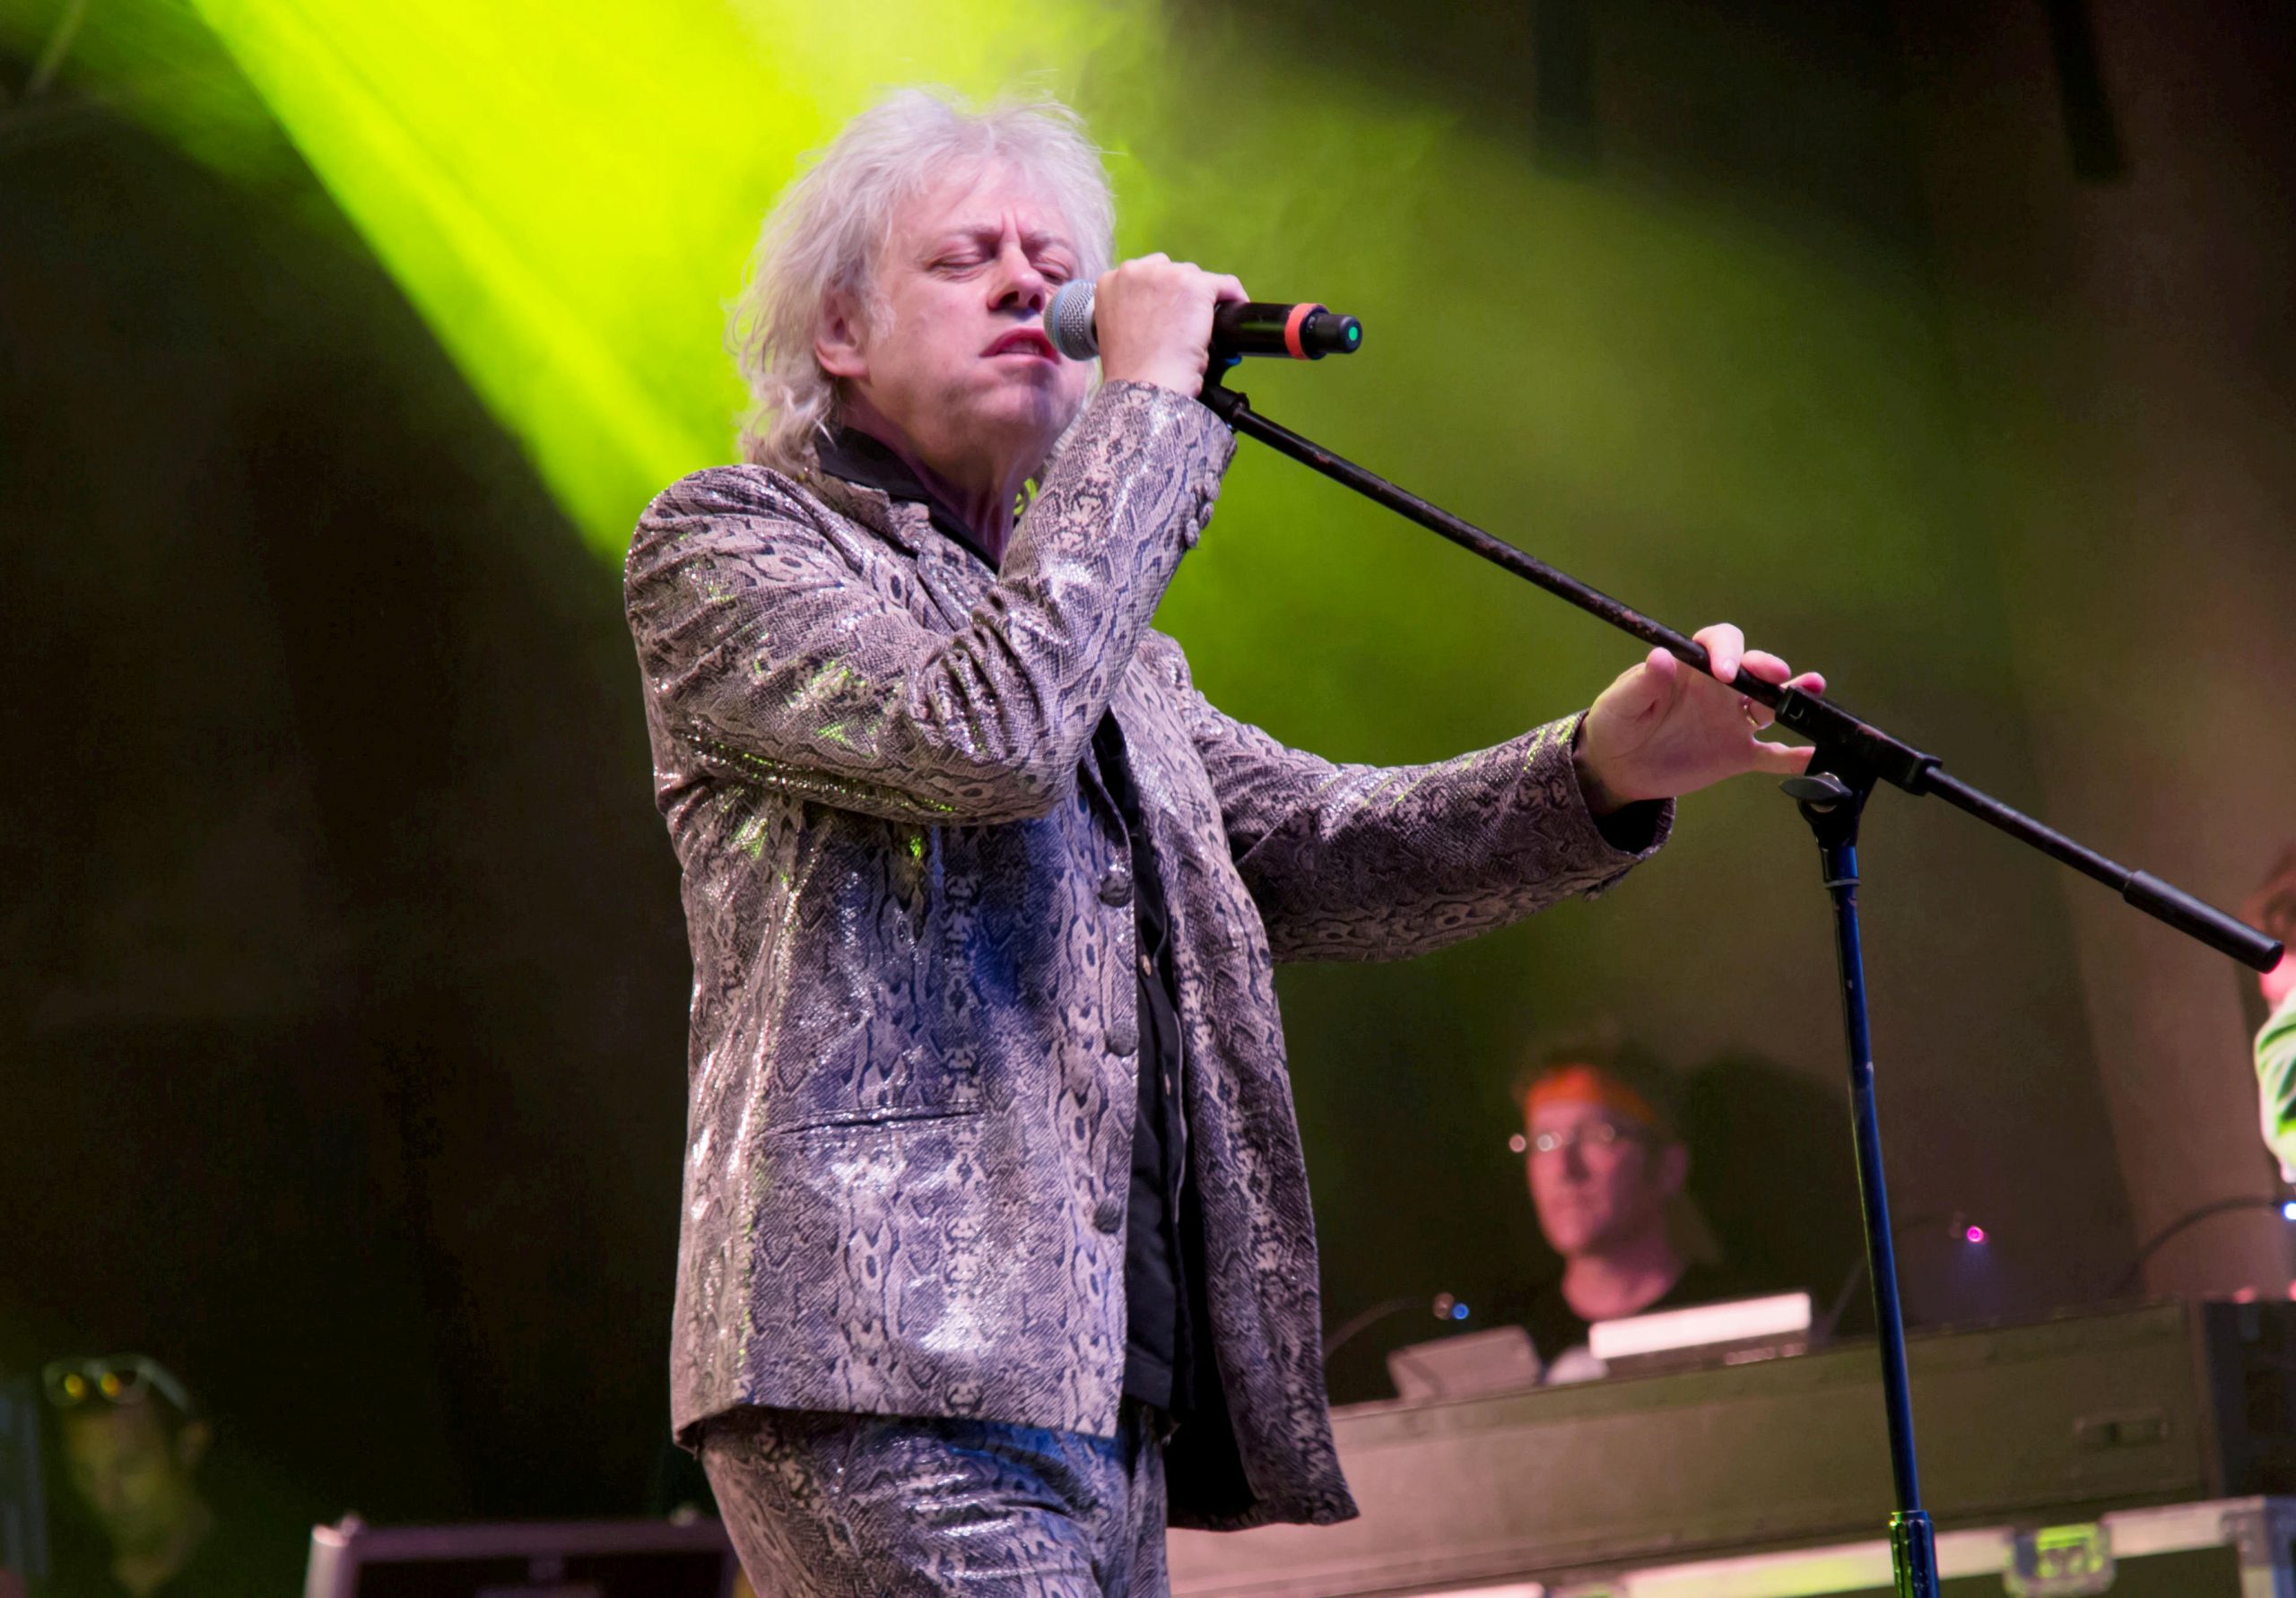 Sir Bob Geldolfe turns 70, from Ireland and Boomtown rats to live aid

